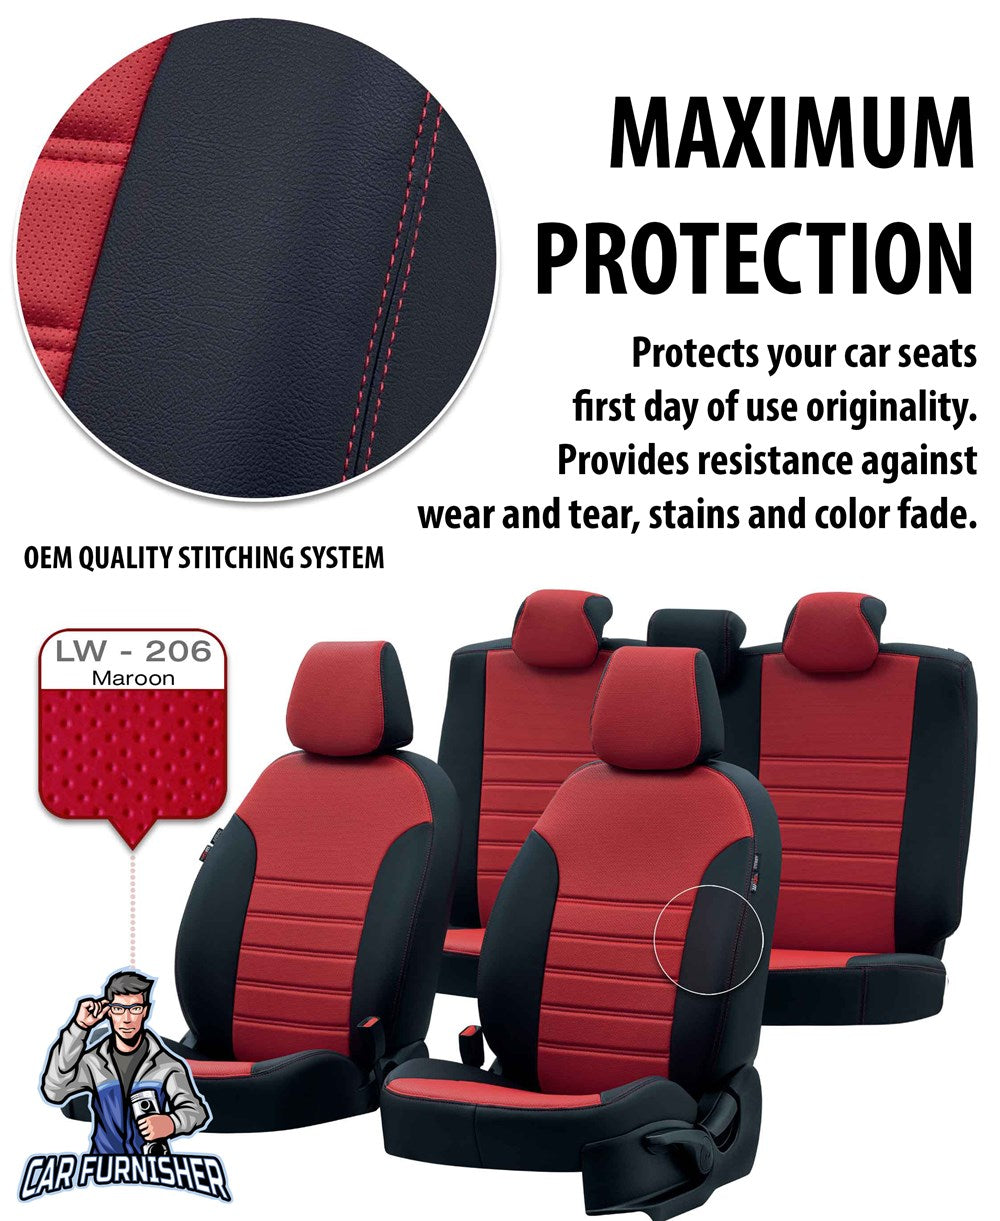 Toyota Hilux Seat Cover Istanbul Leather Design Burgundy Leather